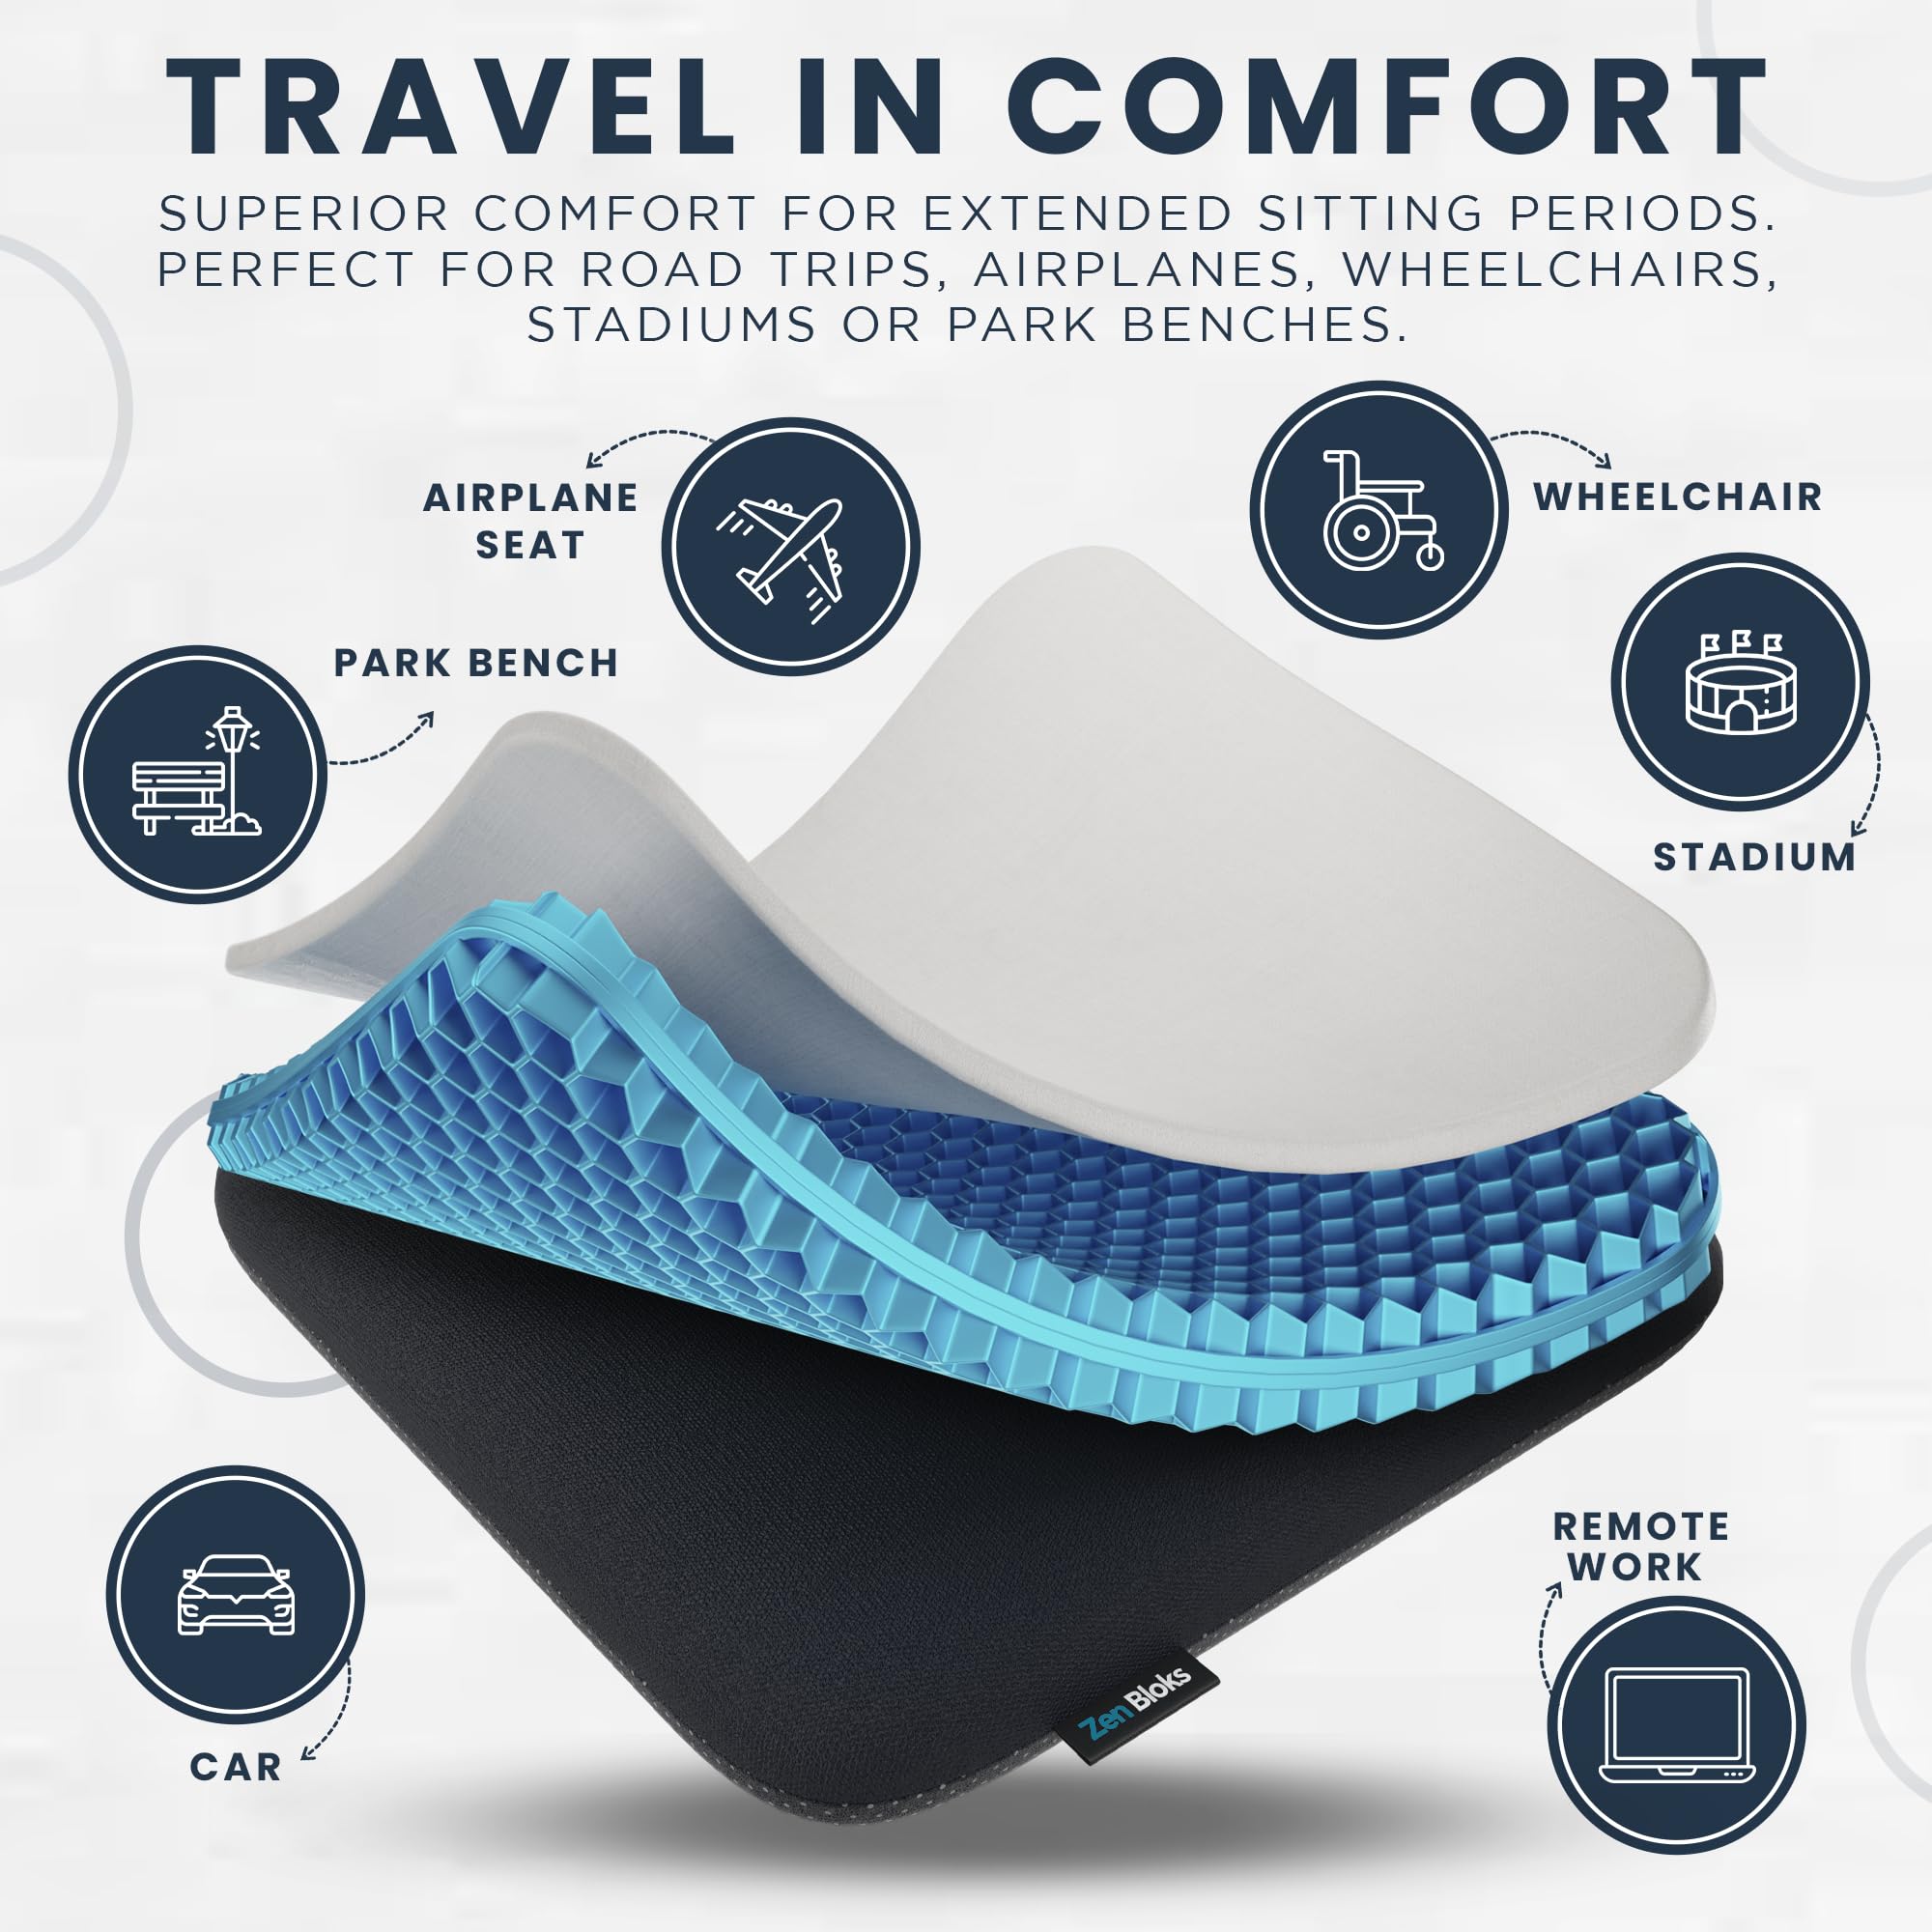 Zen Bloks XL Extra Thick Gel Seat Cushion for Pressure Relief, Tailbone, Sciatica, Coccyx, and Hip Pain Relief - Non-Slip for Wheelchairs, Office Chairs, Car Seat for Driving (20"x20"x2")